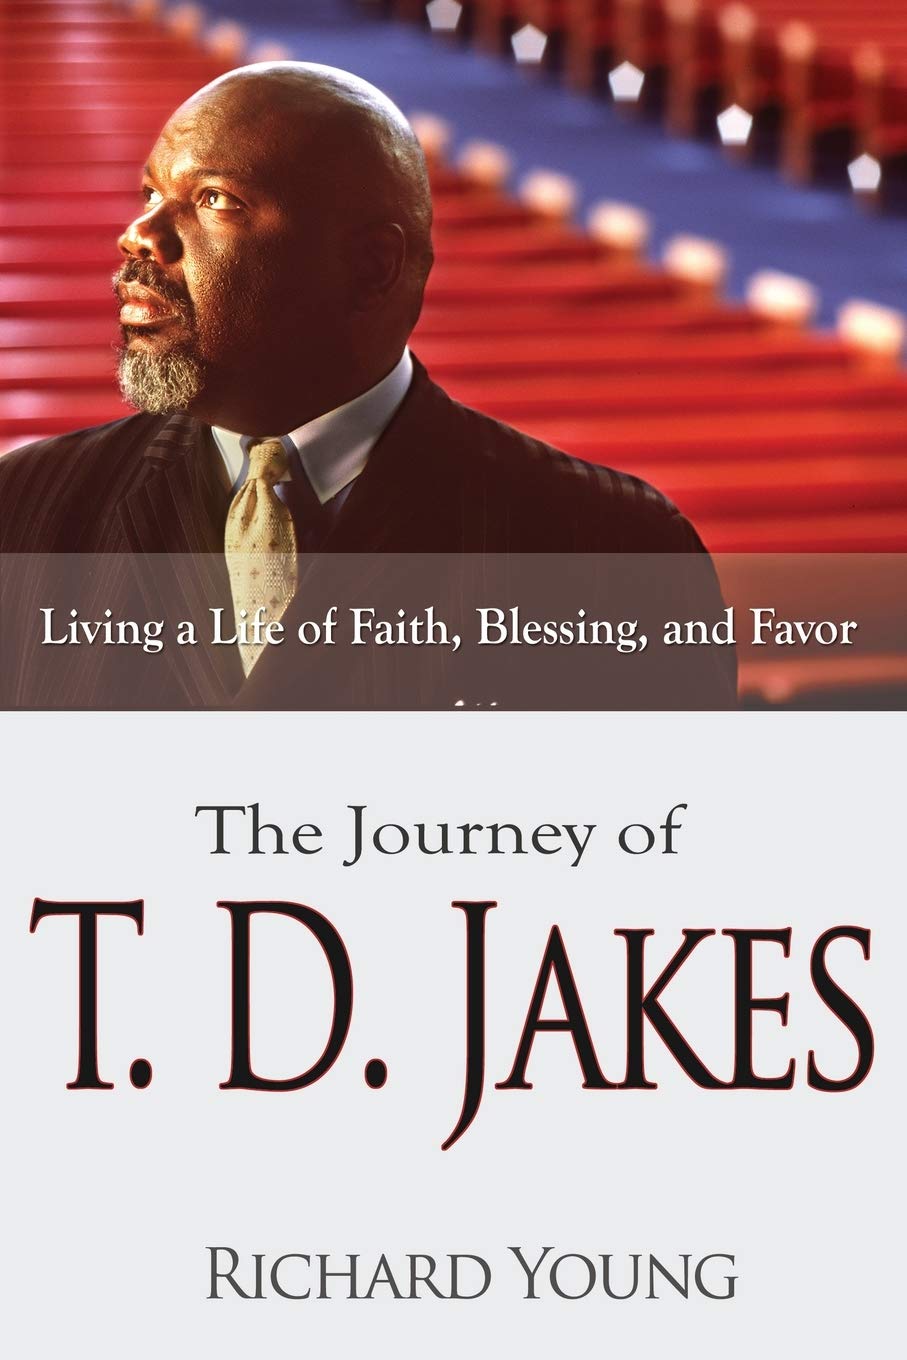 The Journey of T.D. Jakes: Living a Life of Faith, Blessing, and Favor - SureShot Books Publishing LLC